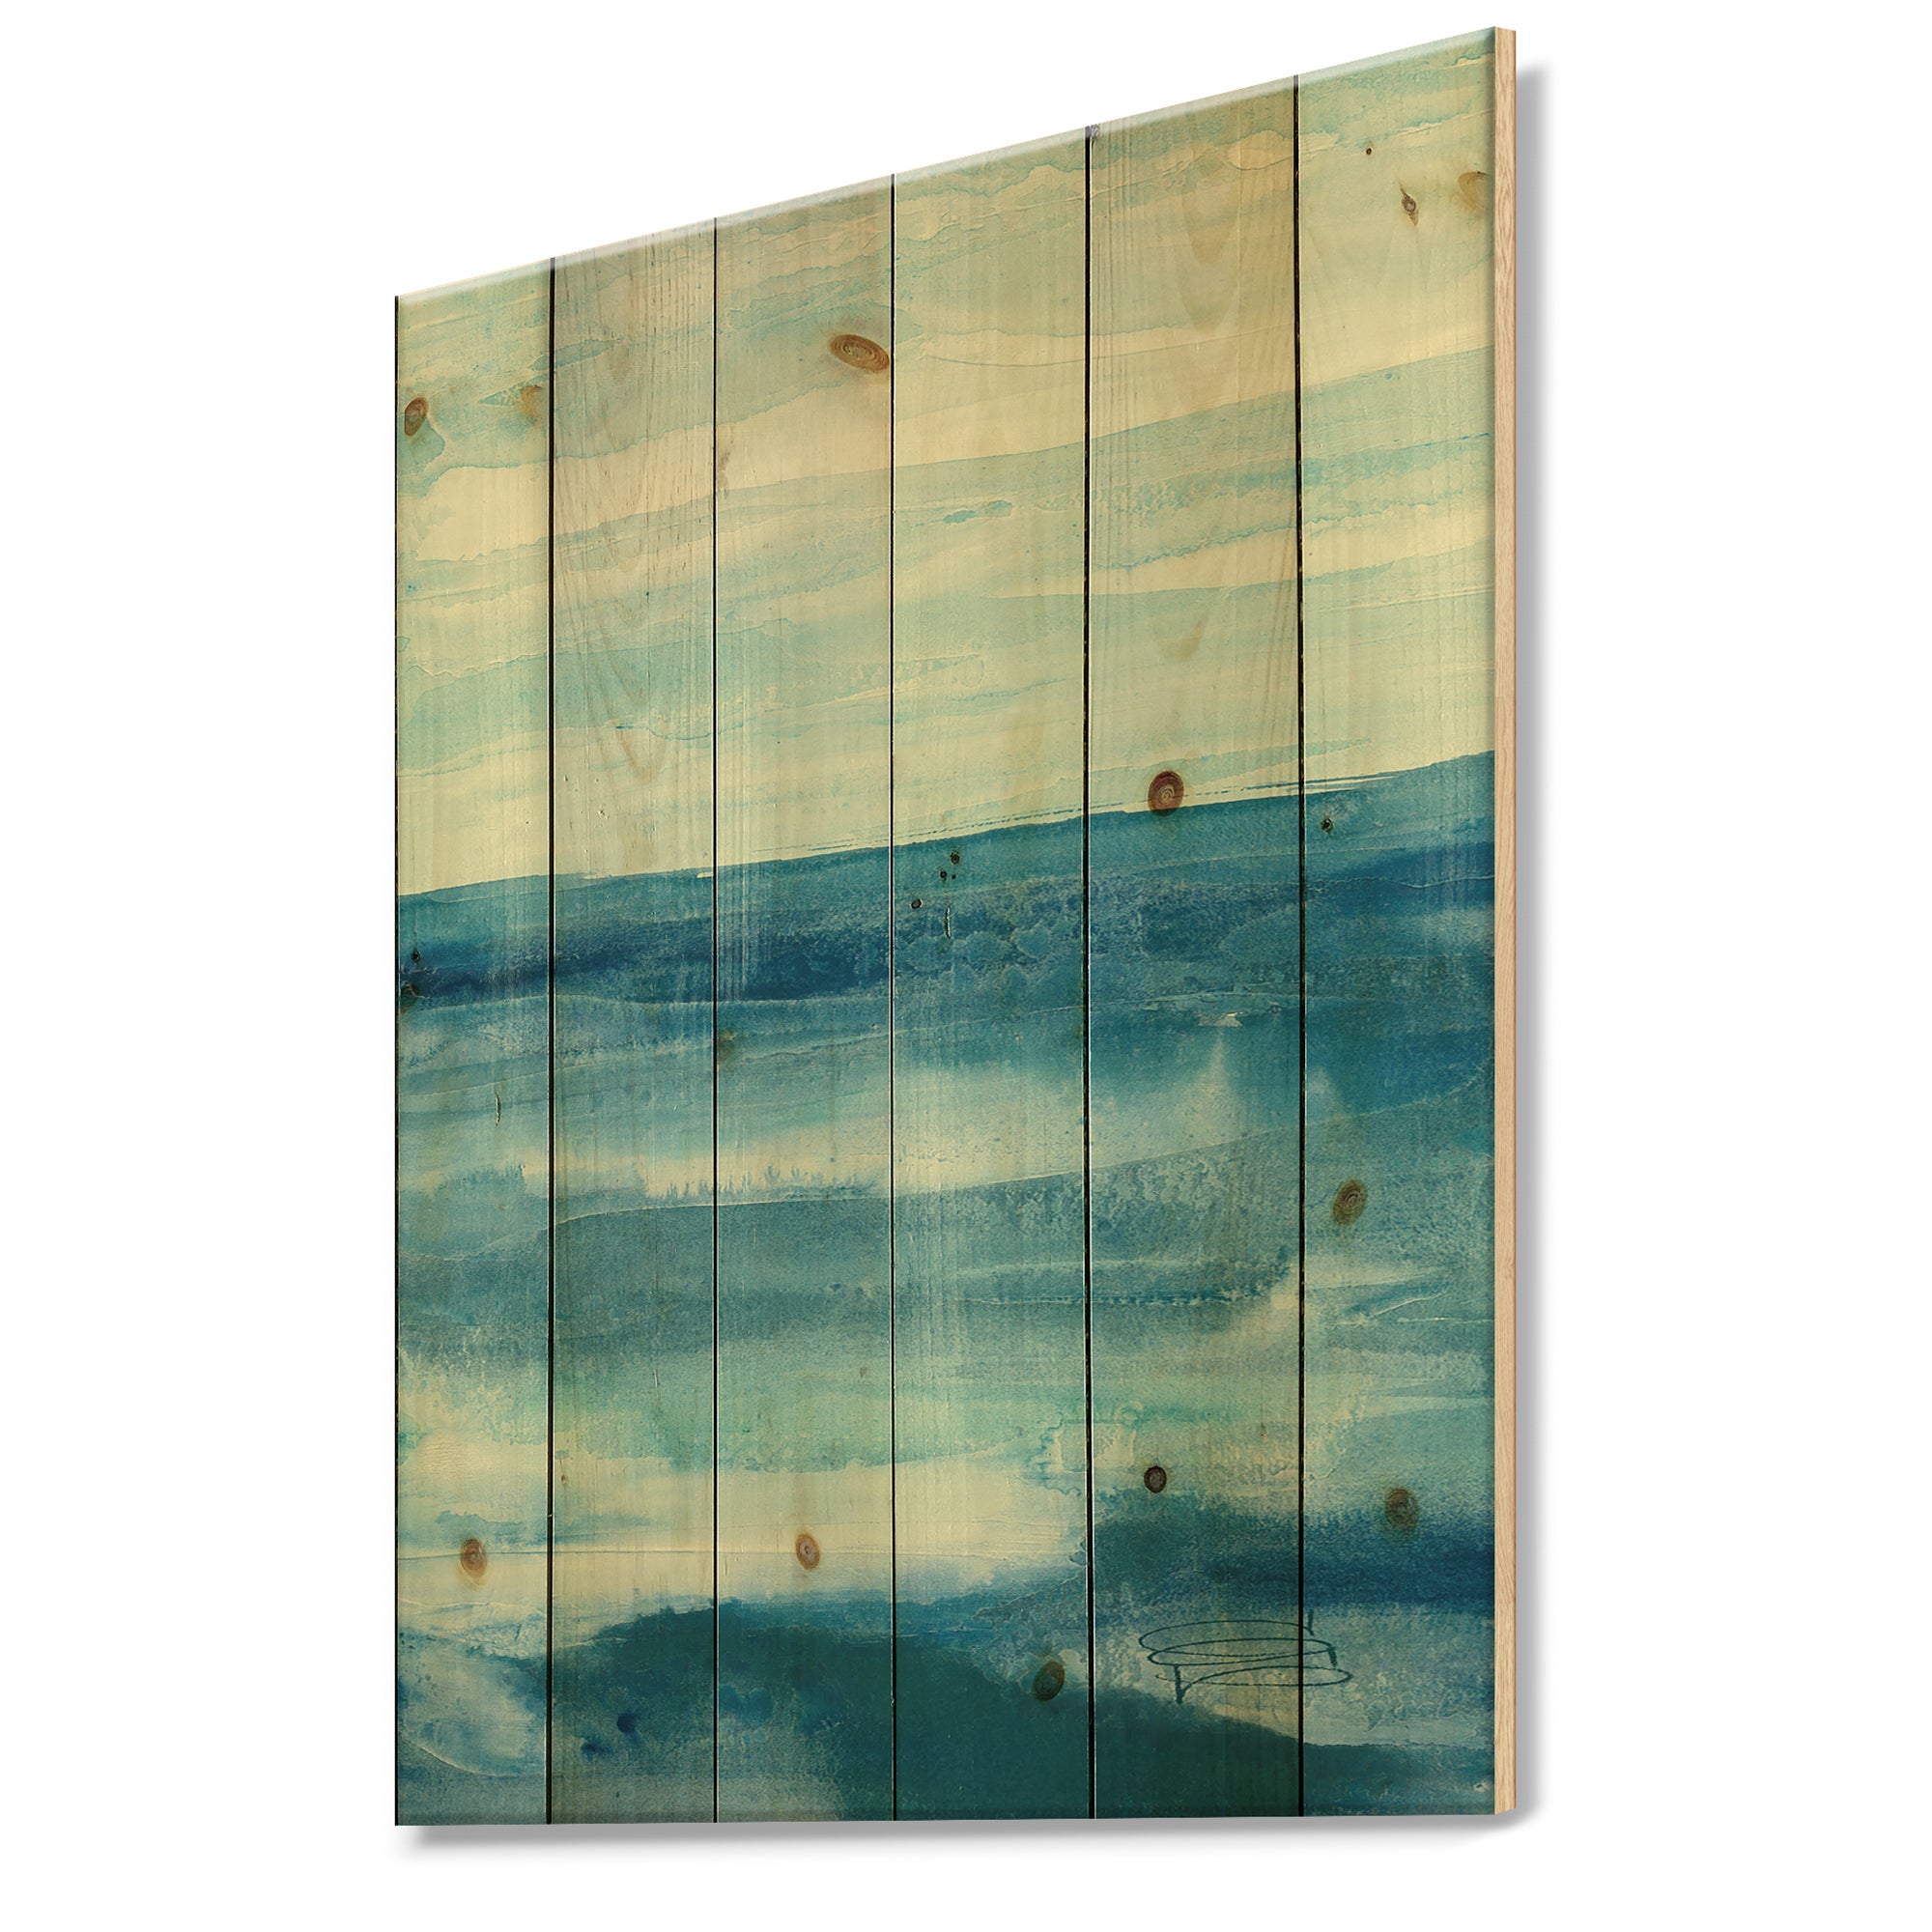 Lost in Blue Panel - Nautical & Coastal Print on Natural Pine Wood - 15x20